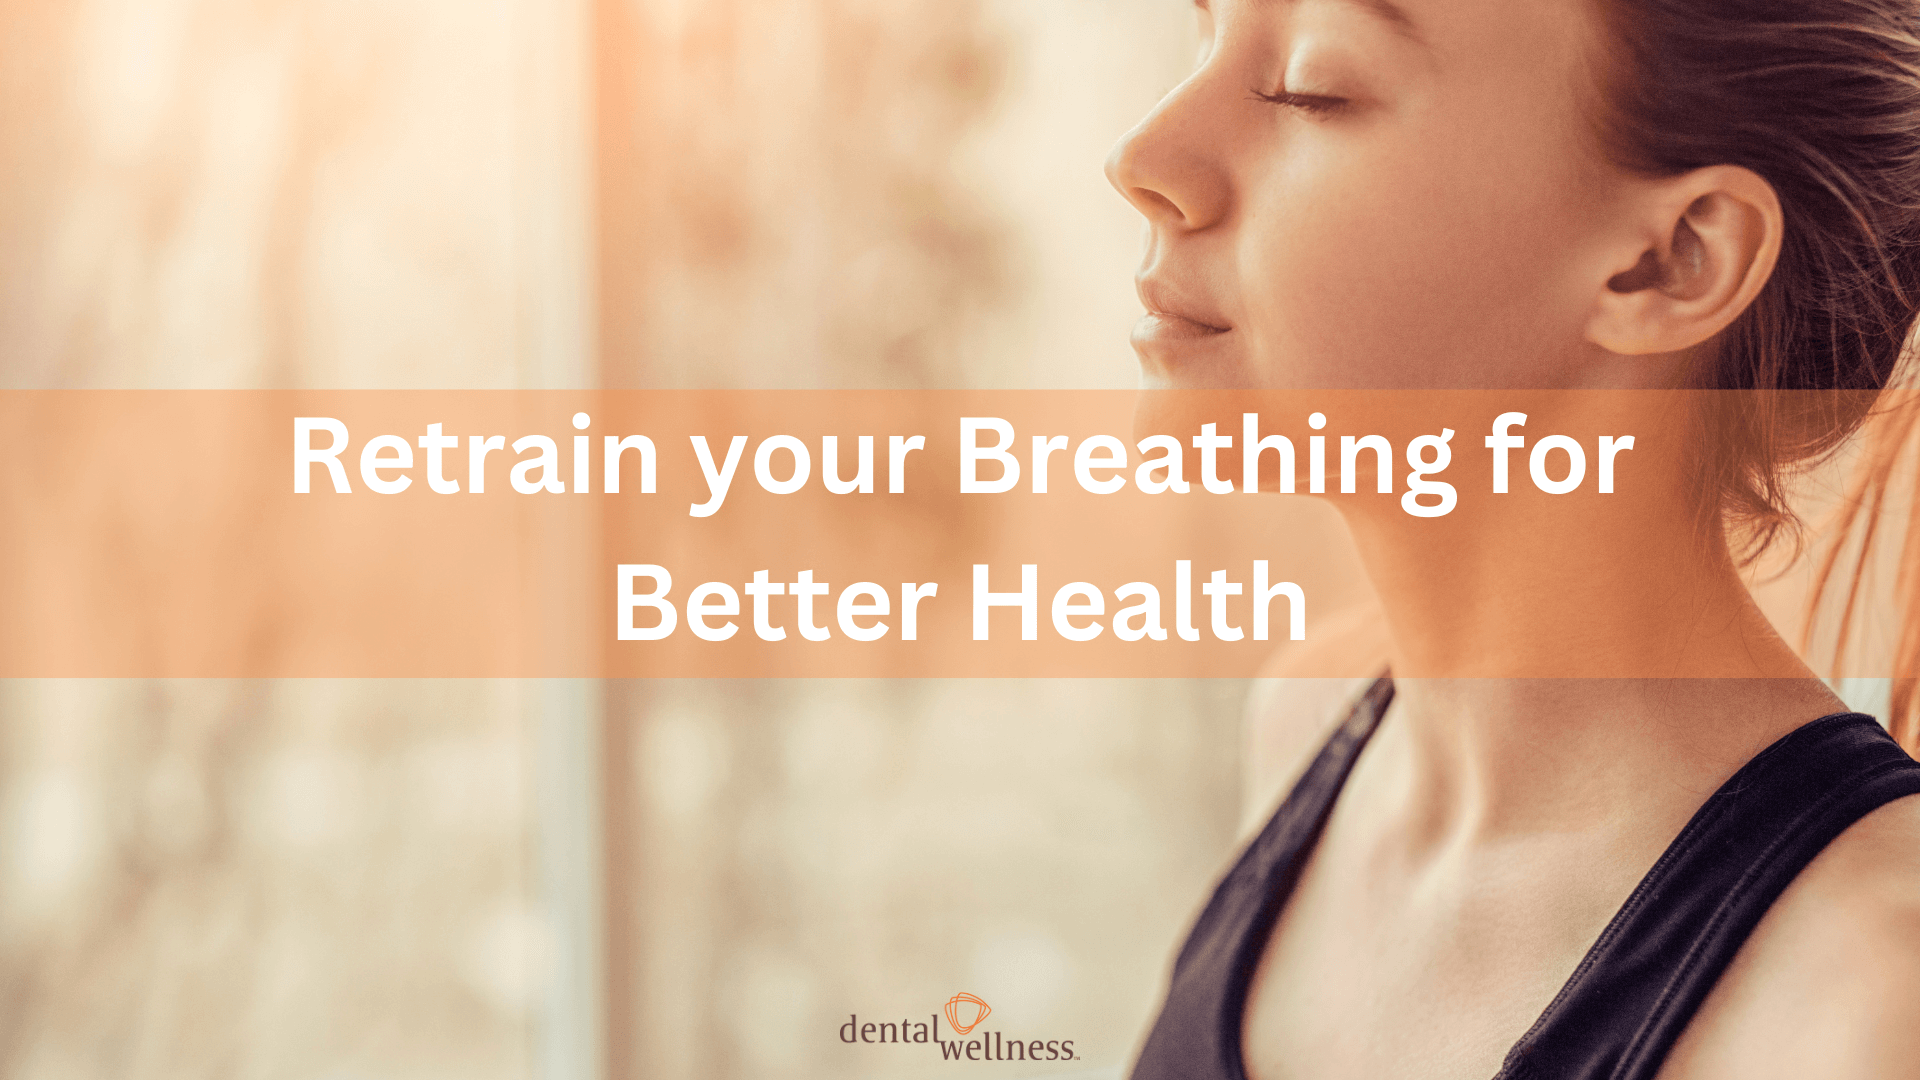 Retrain your breathing for Better Health